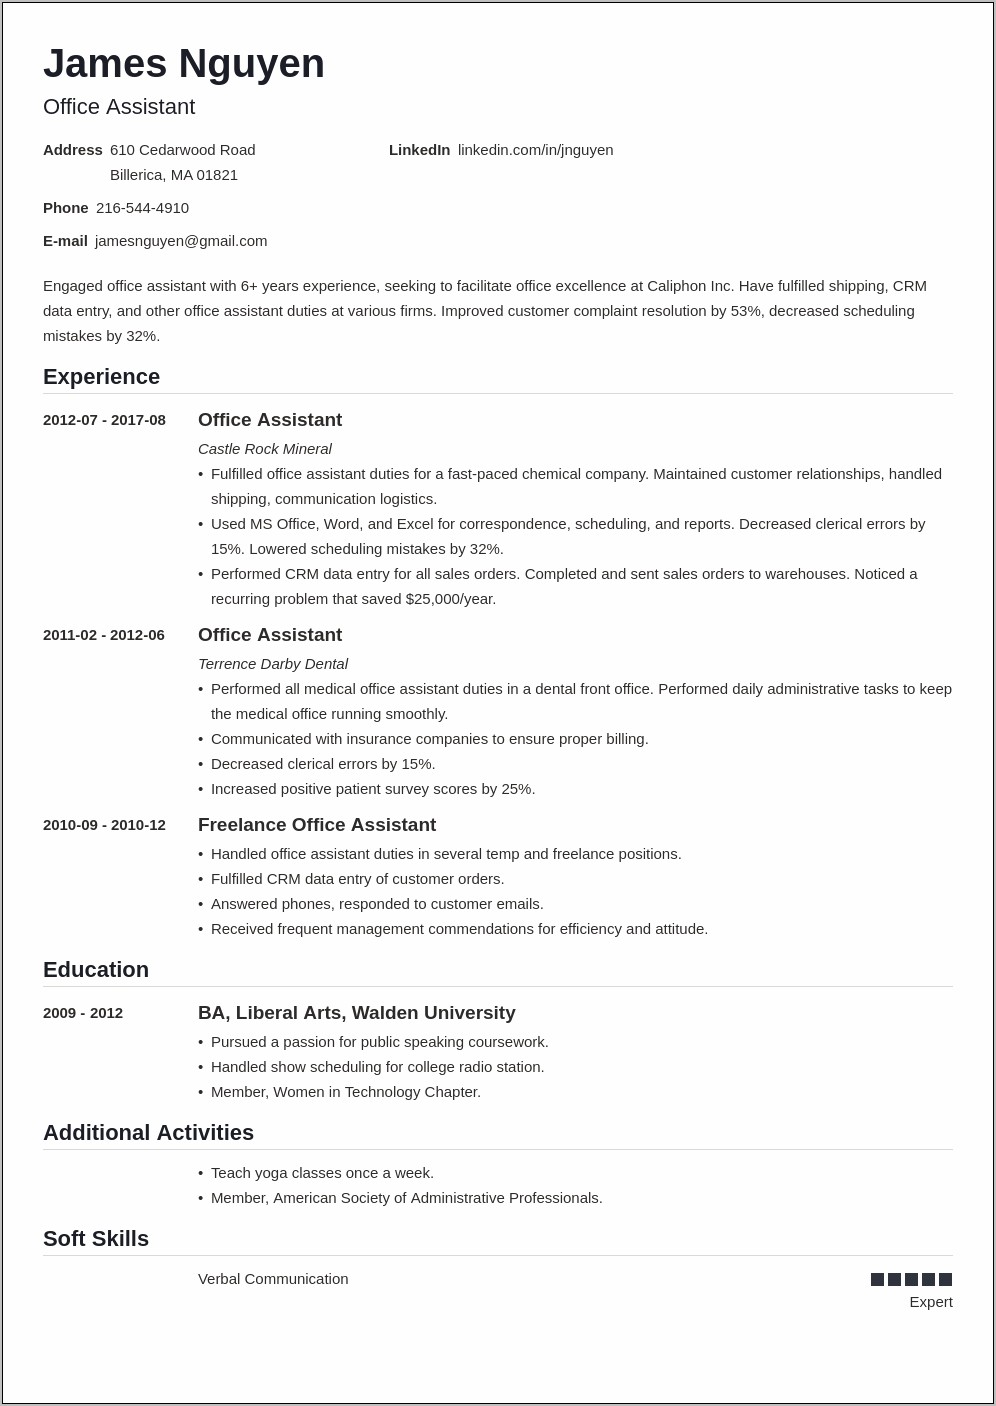 Sample Resume For Office Assistant In School